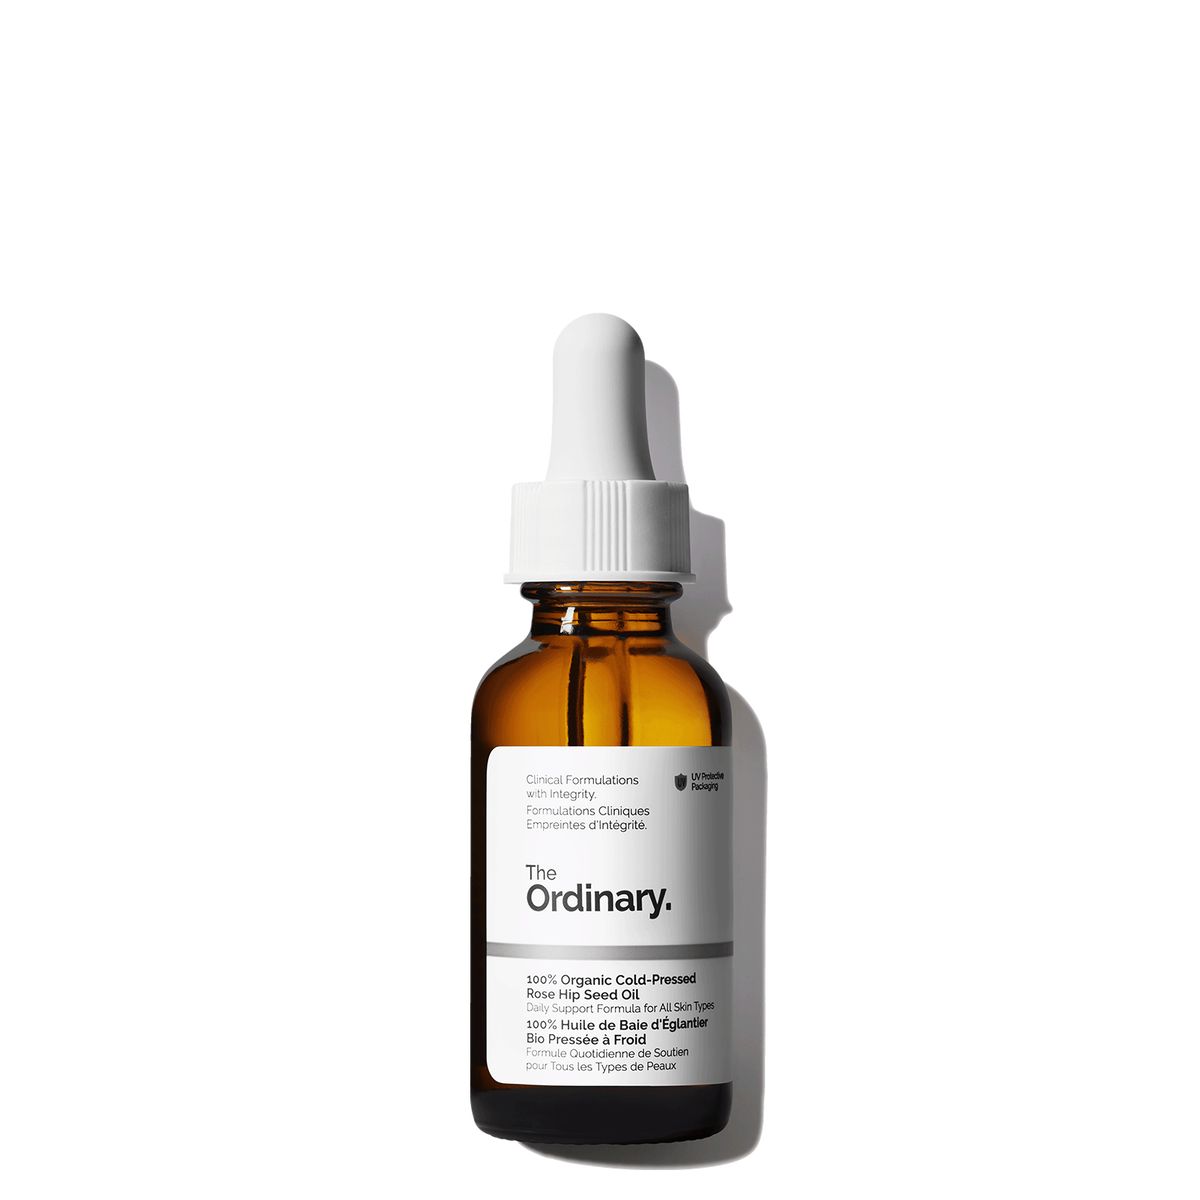 The Ordinary 100% Organic Cold-Pressed Rose Hip Seed Oil100% Organic Cold-Pressed Rose Hip Seed O... | The Ordinary